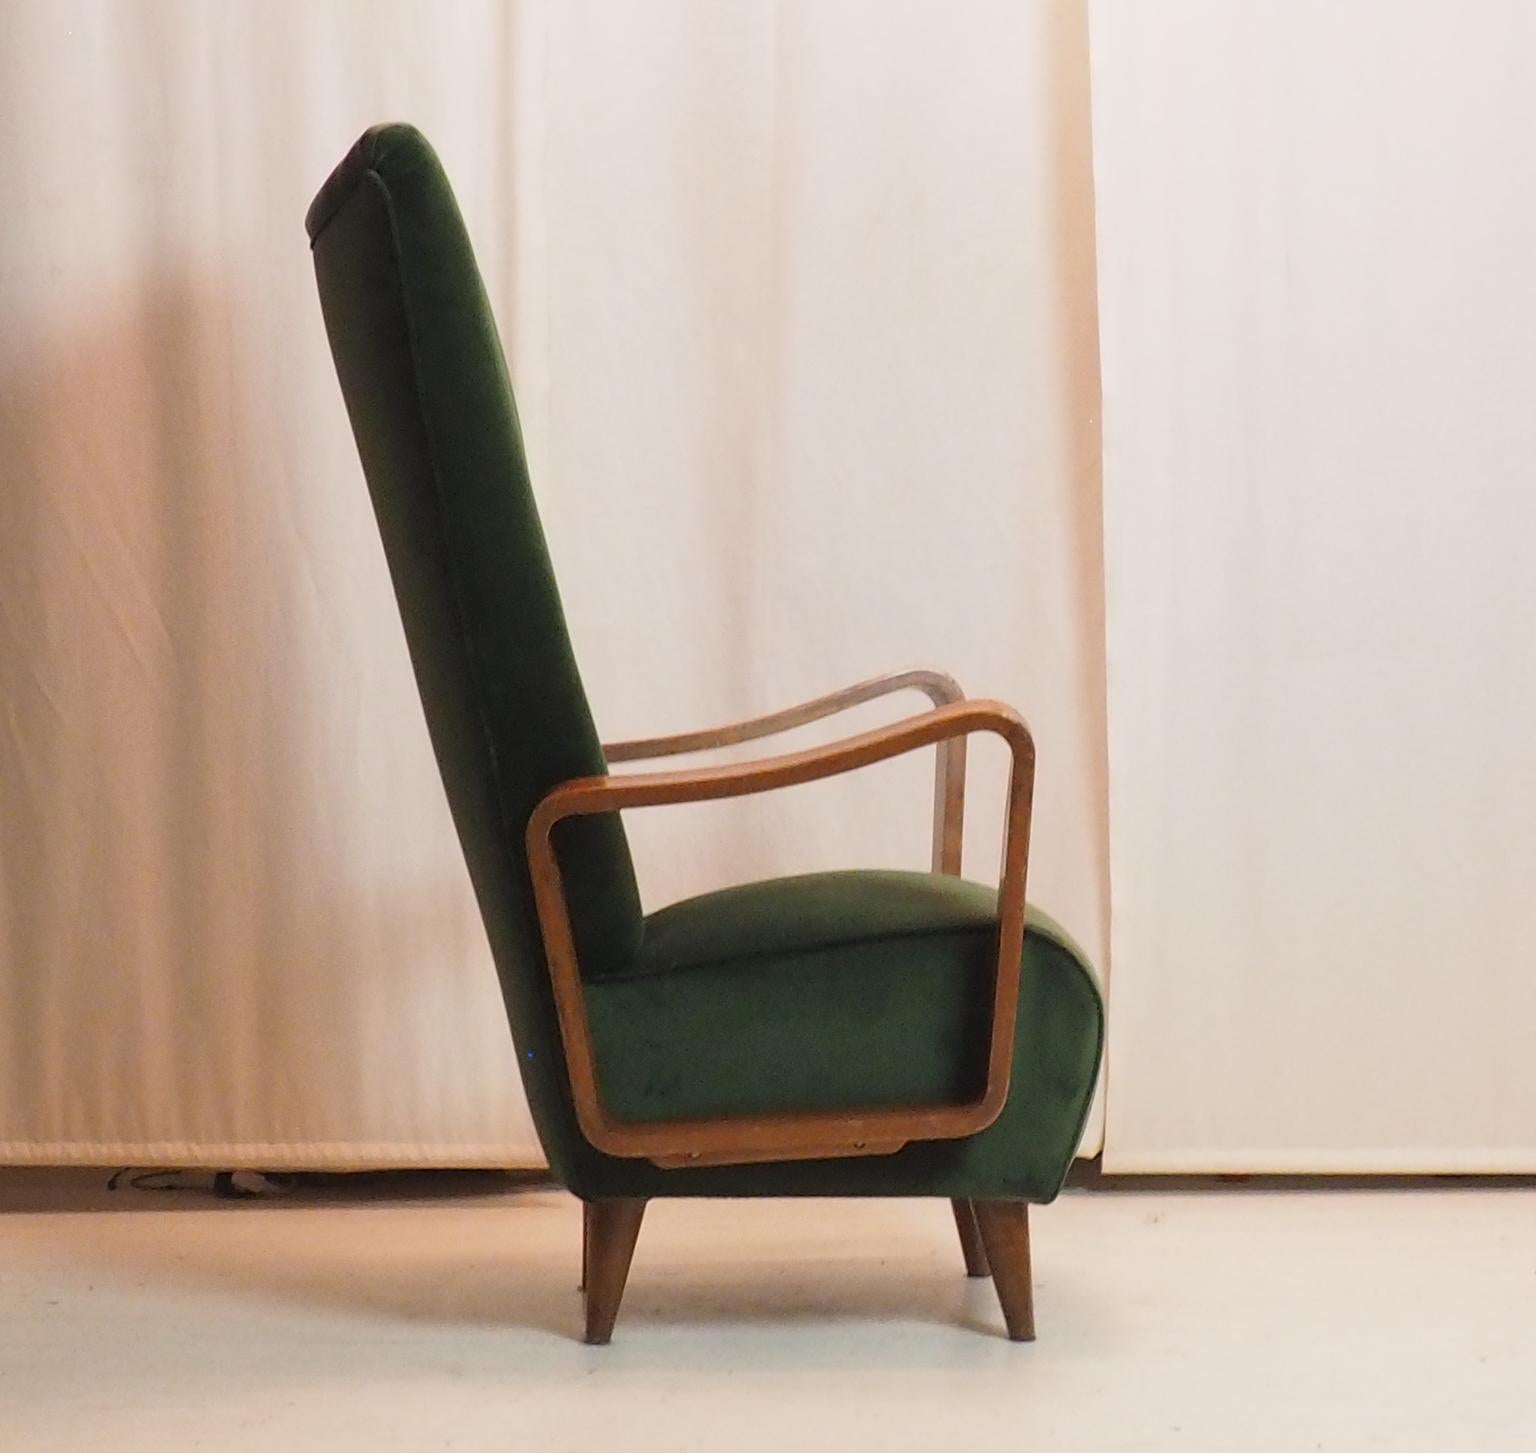 Midcentury High Back Italian Green Armchairs by Pietro Lingeri, Italy 1950s For Sale 6